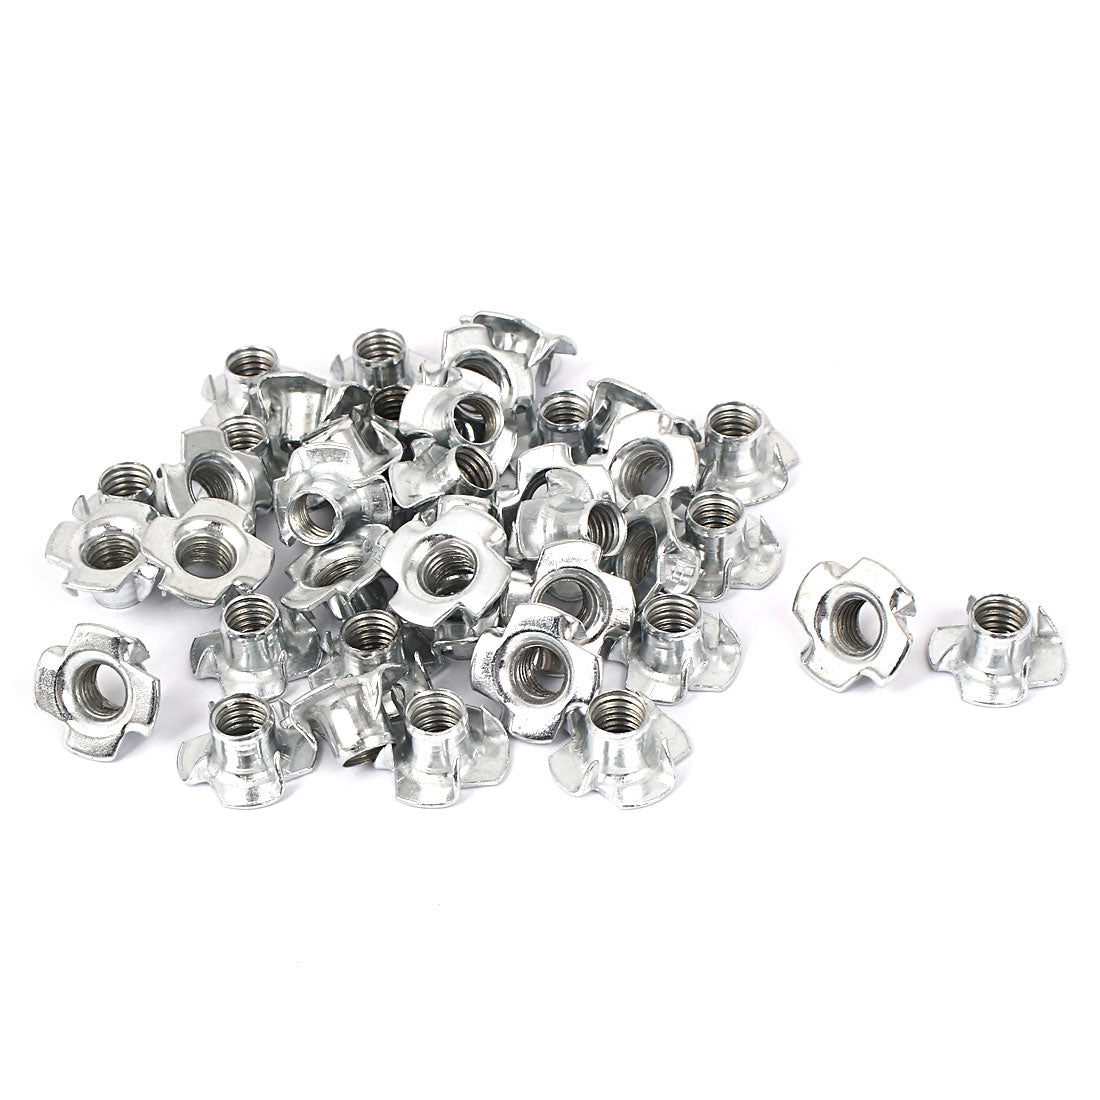 uxcell Uxcell Furniture M8 Thread Zinc Plated 4 Prong Tee Nuts Insert Connectors 40pcs